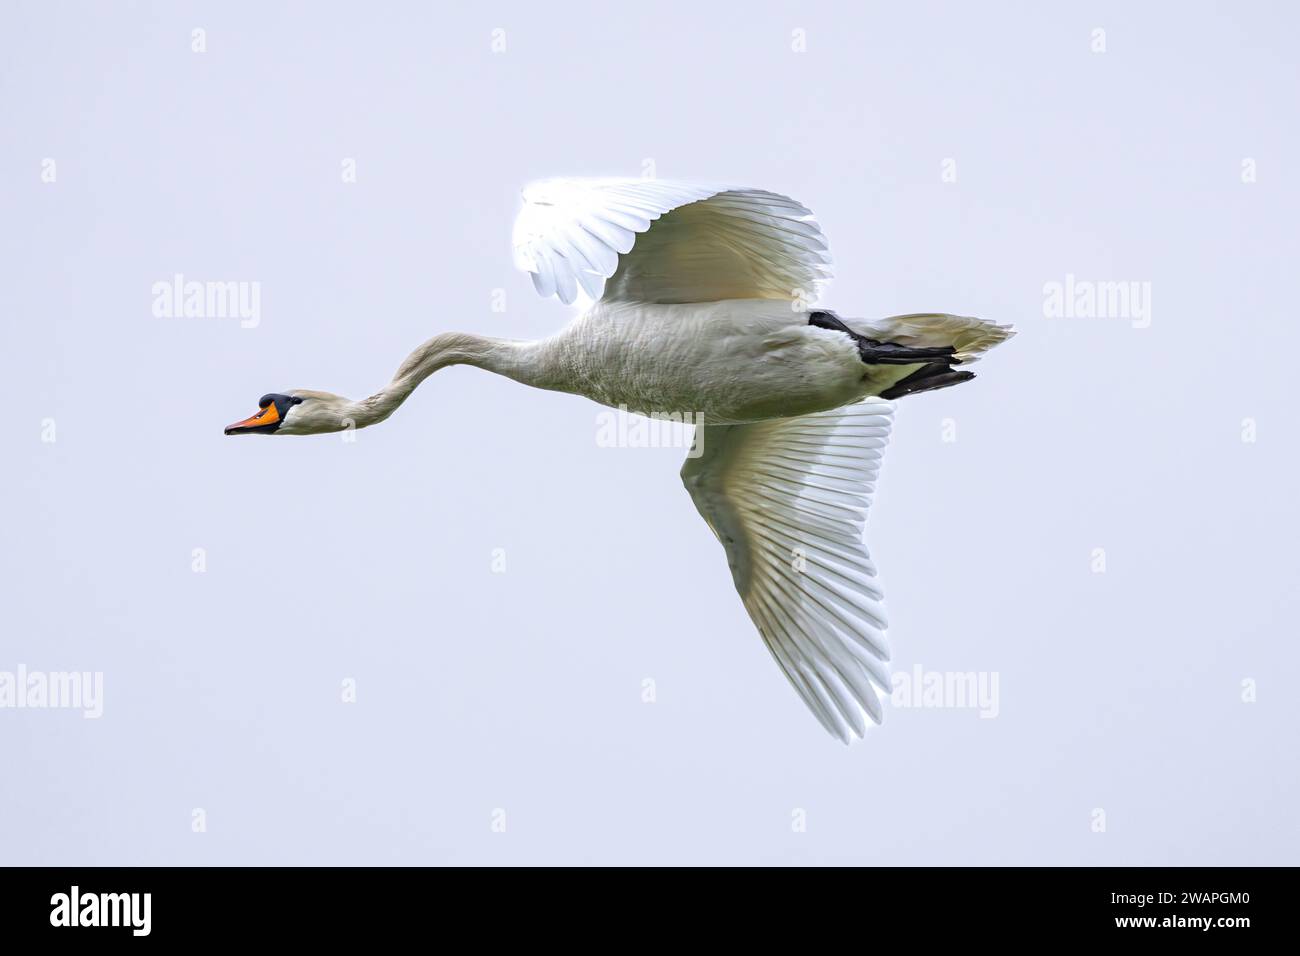 Close Up of a mute swan, Cygnus olor, flying overhead with eye contact and typical arched swan neck against neutral light background Stock Photo